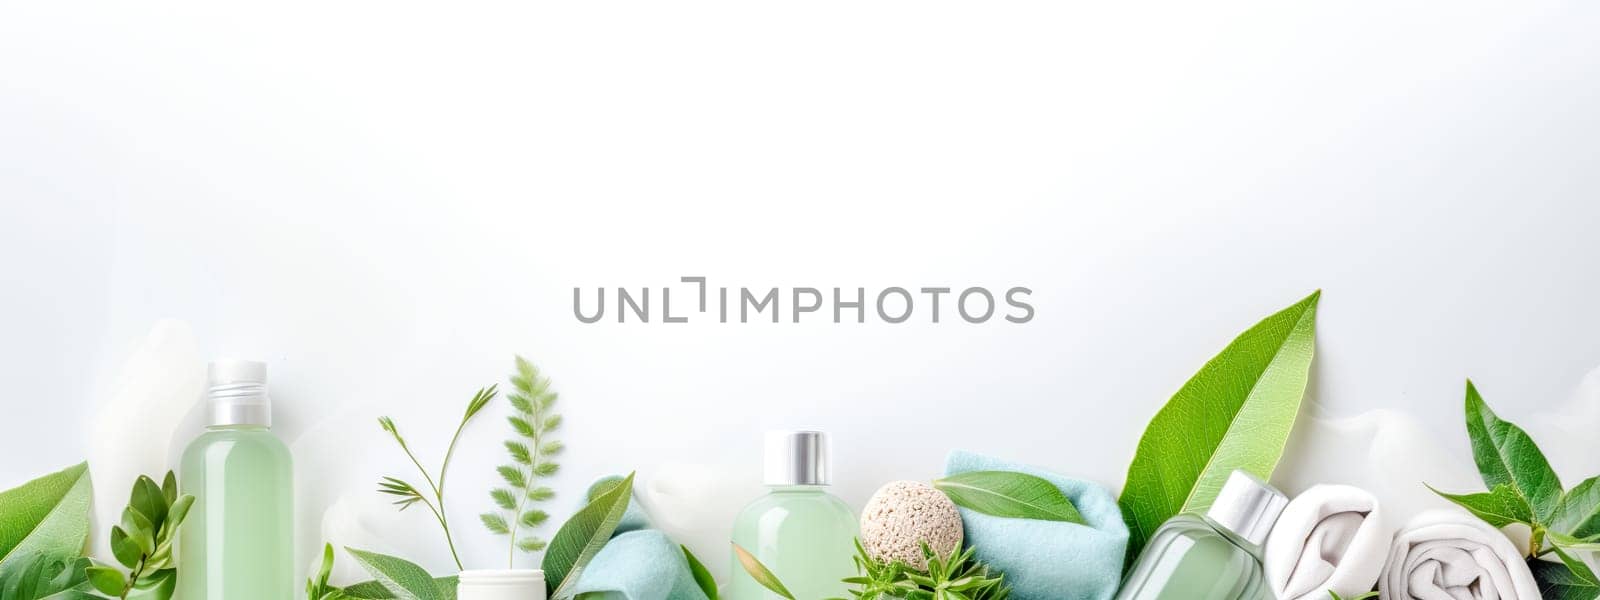 bio clean, eco-friendly theme with various green cleaning products and fresh leaves arranged neatly against a white background, offering plenty of copy space for environmentally conscious messaging by Edophoto